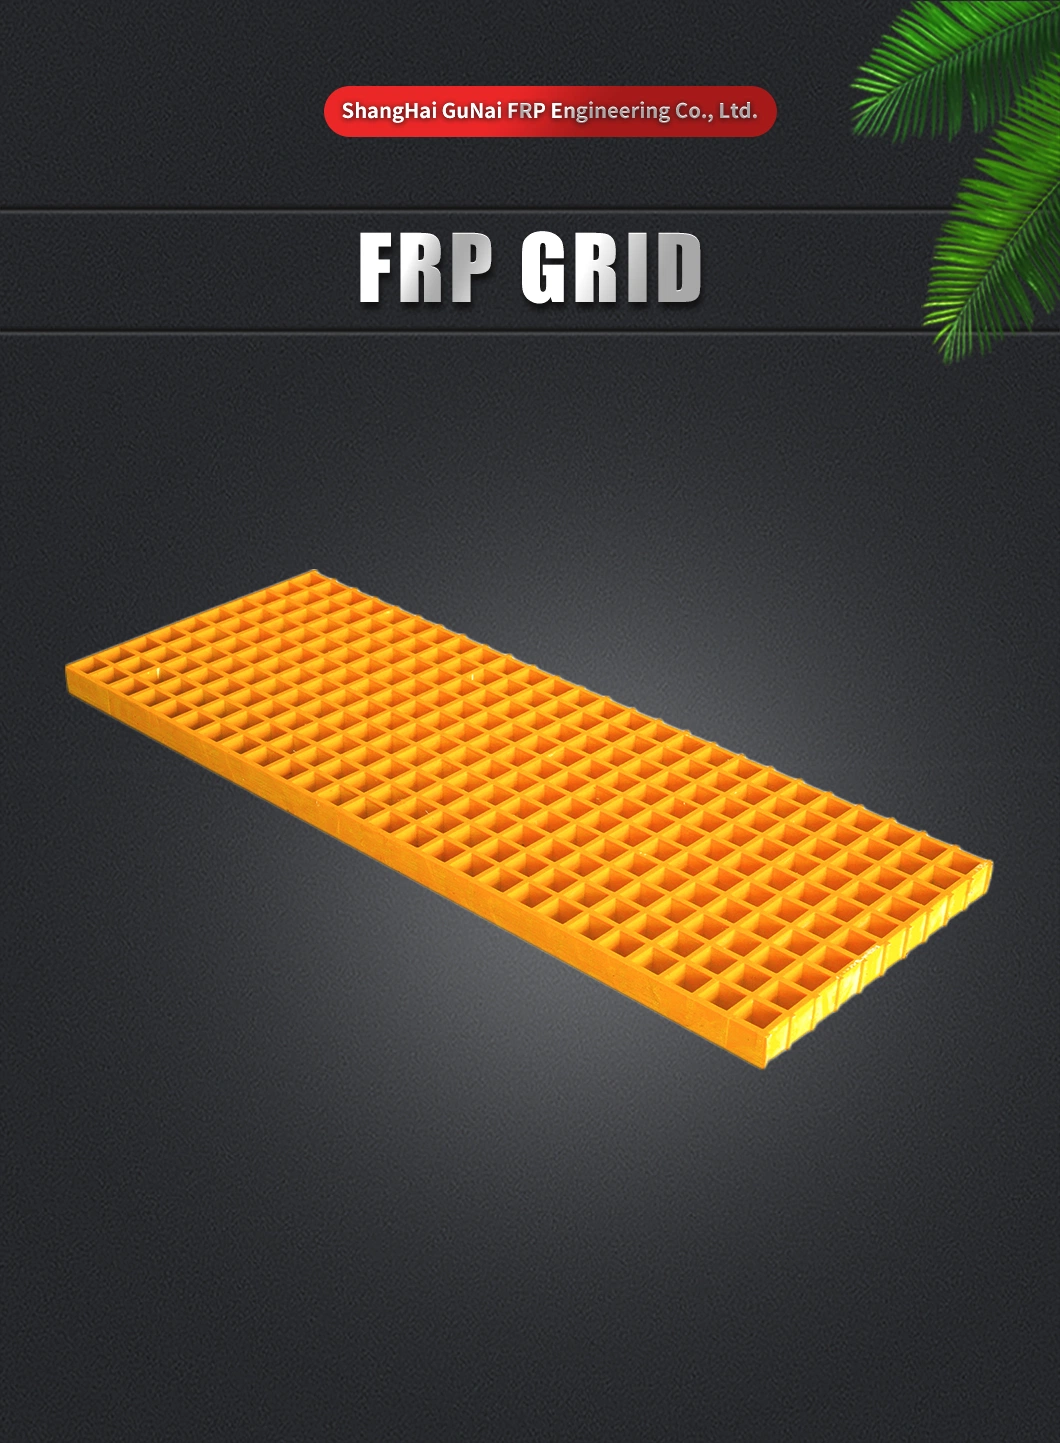 Sun Resistant FRP Grid for Outdoor Use